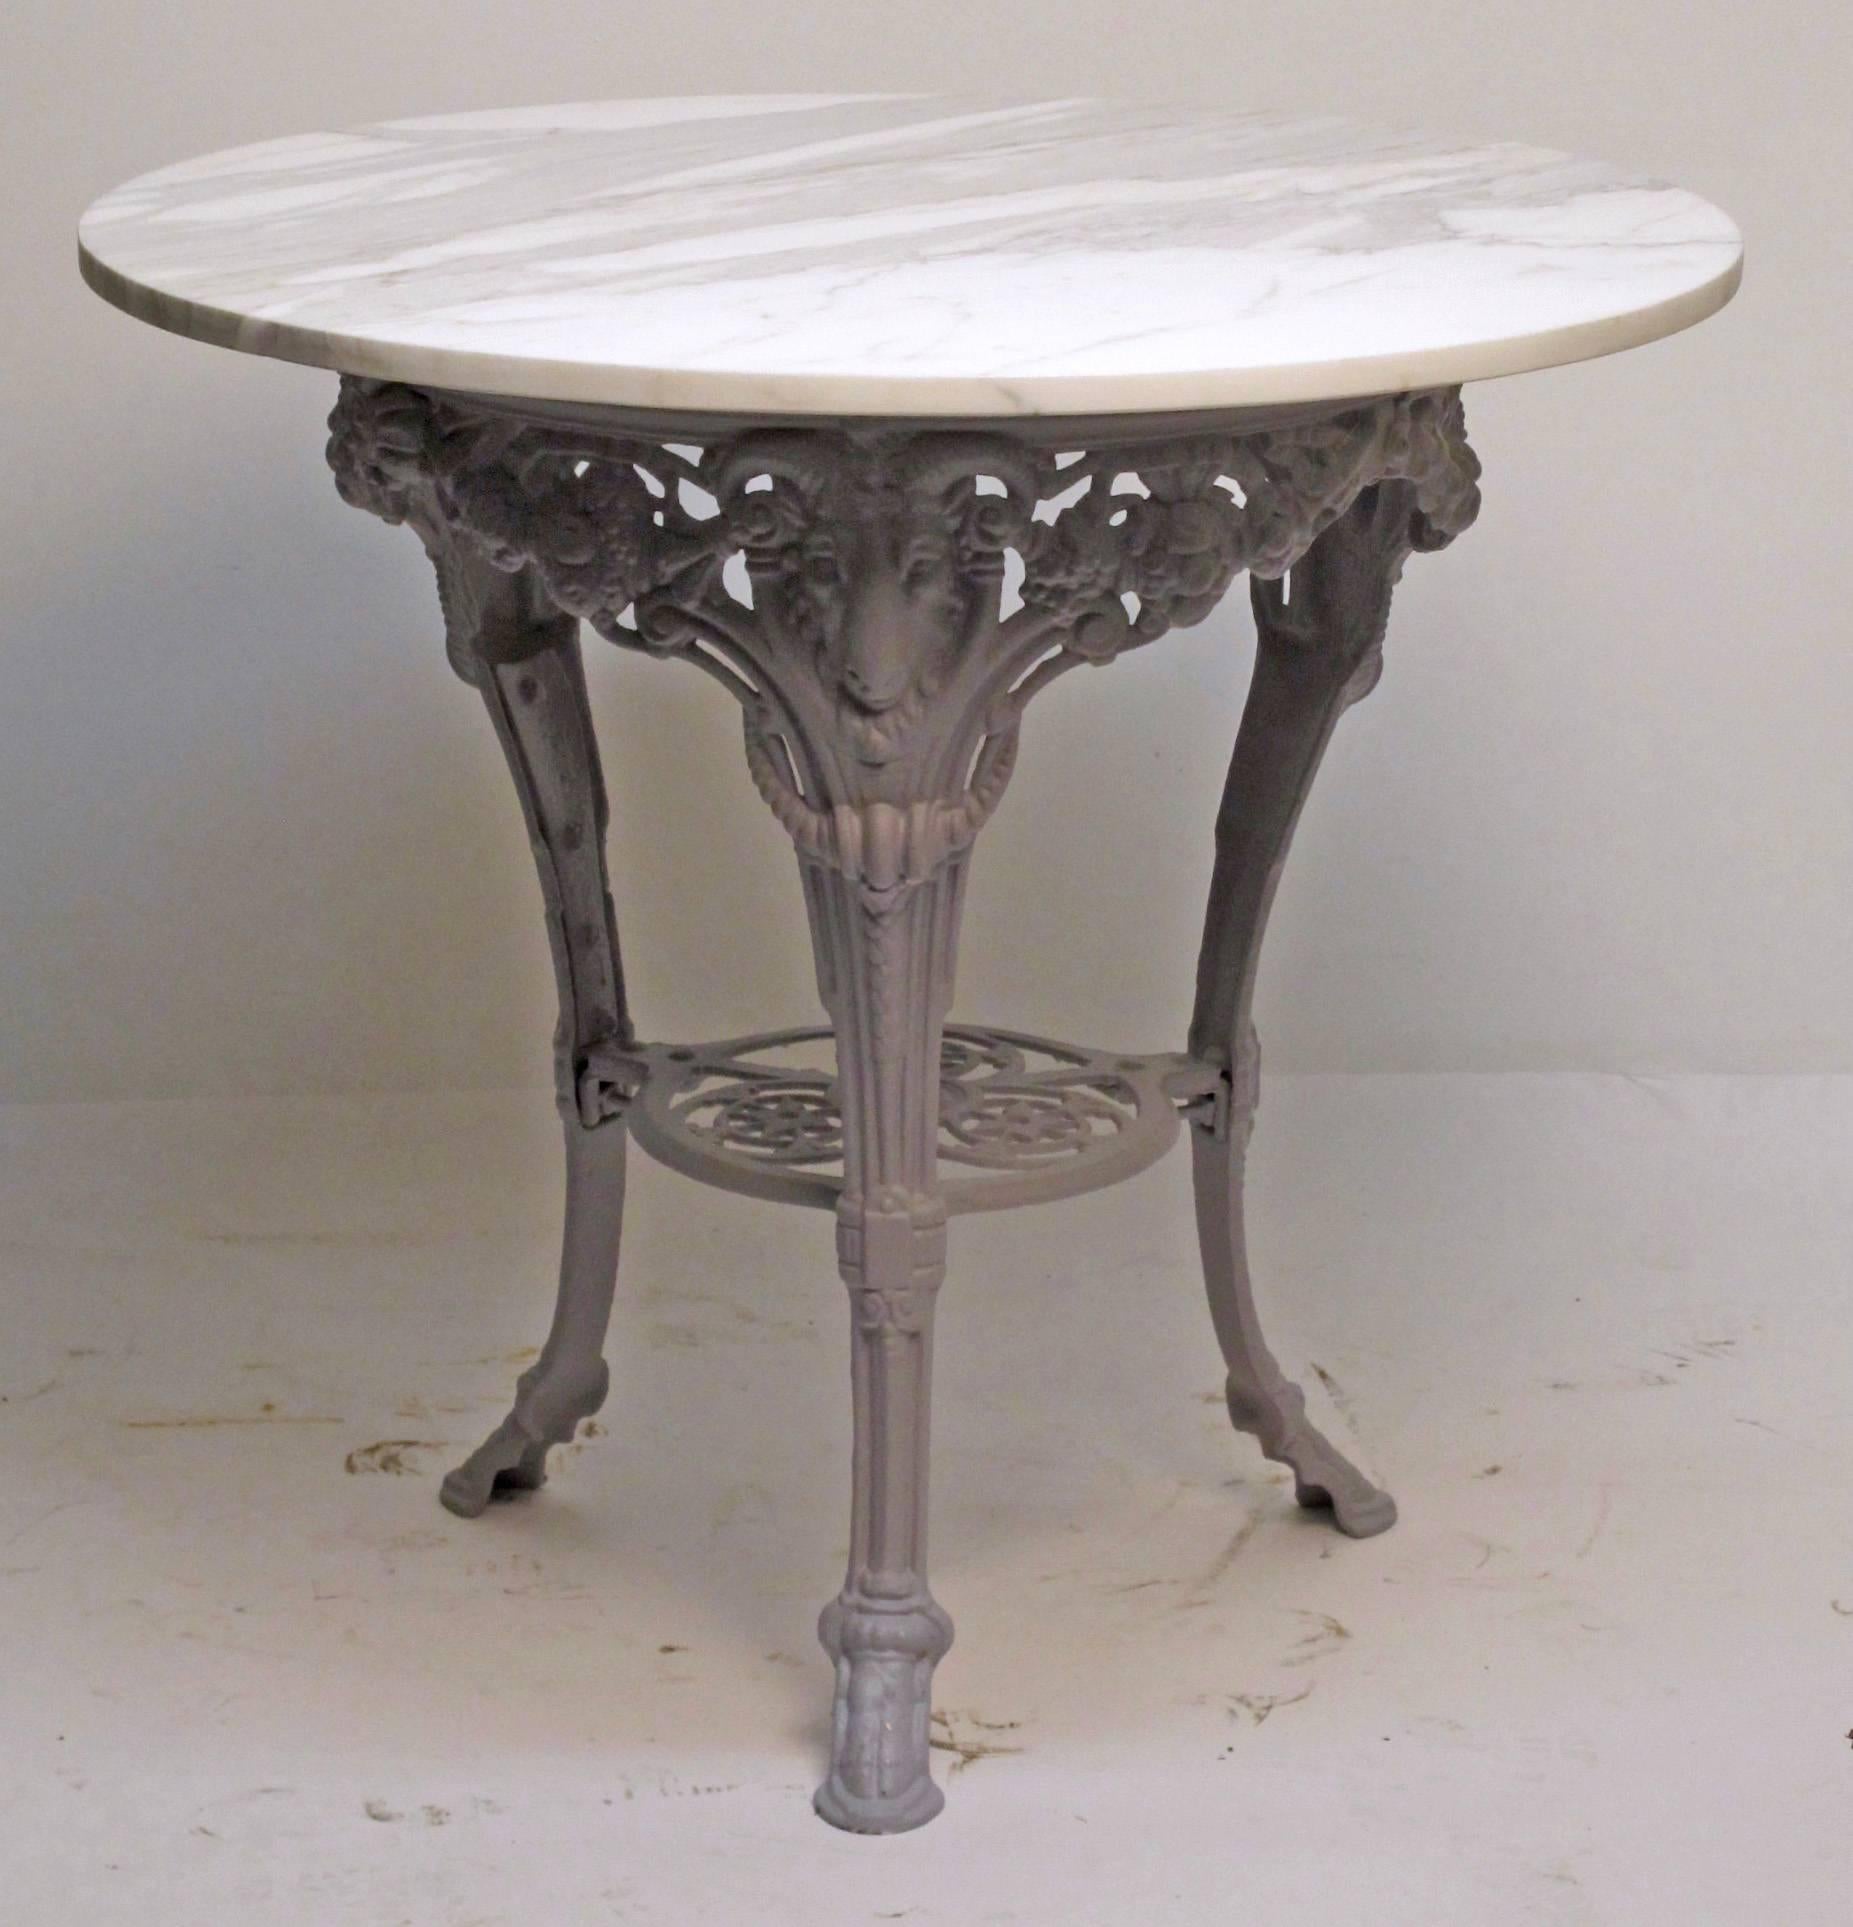 Cast iron base with marble top garden table. Currently primed in a flat gray color, ready for paint of desired color. There is an old professional repair to one leg, and a small minor loss on the stretcher (not visible and does not affect the